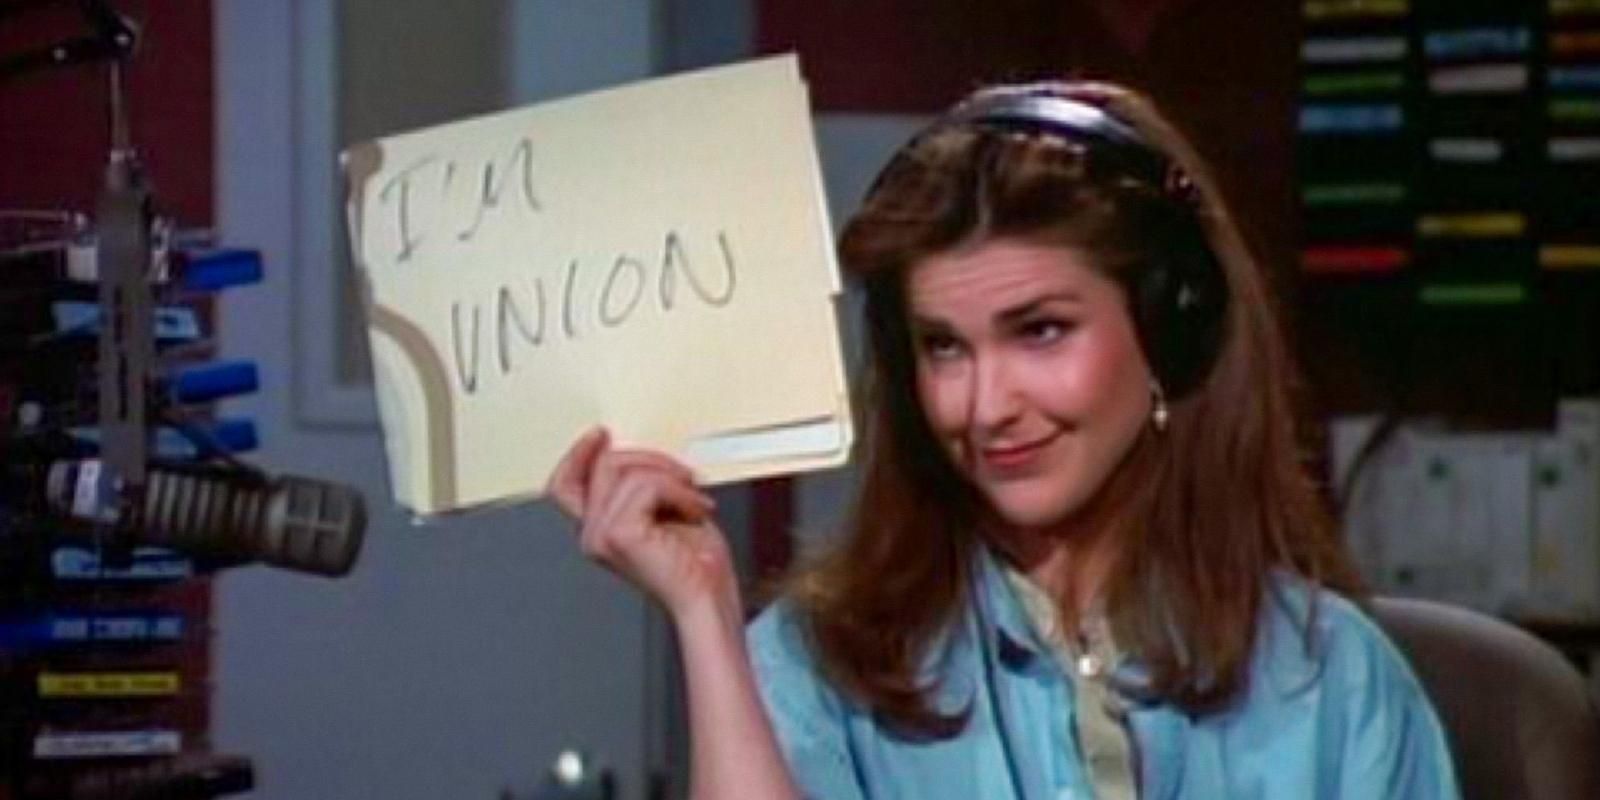 Roz Doyle holds up a sign saying Im union in Frasier